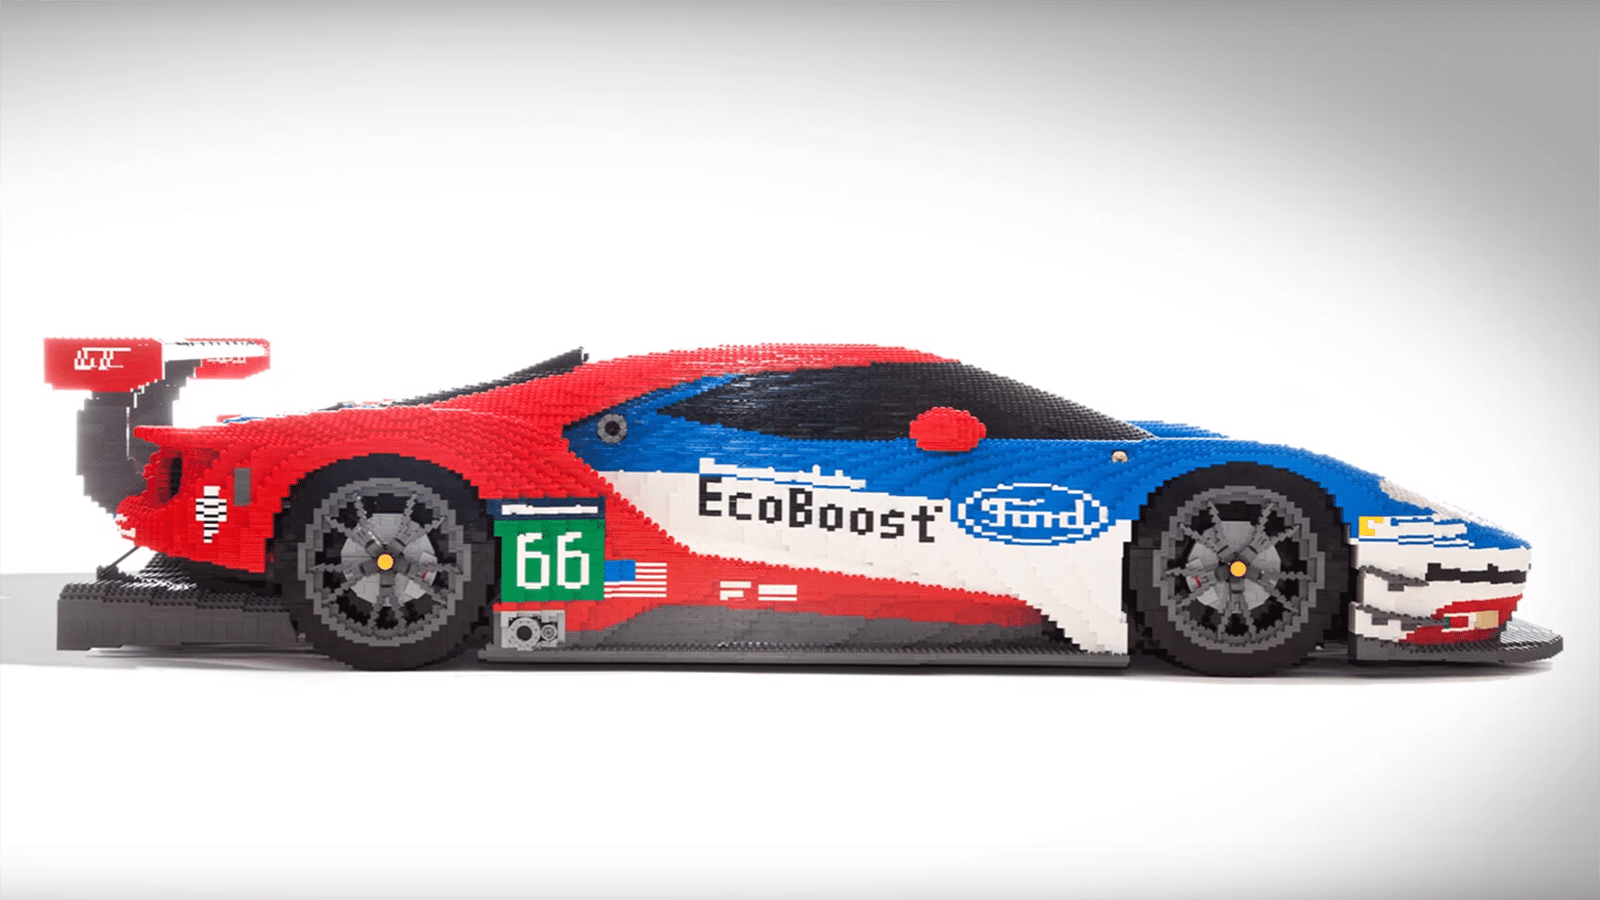 Ford GT Race car all made with LEGOs (Photo: YouTube/<a href="https://www.youtube.com/watch?v=fel4TwrTsjs&amp;feature=youtu.be">Ford</a>)